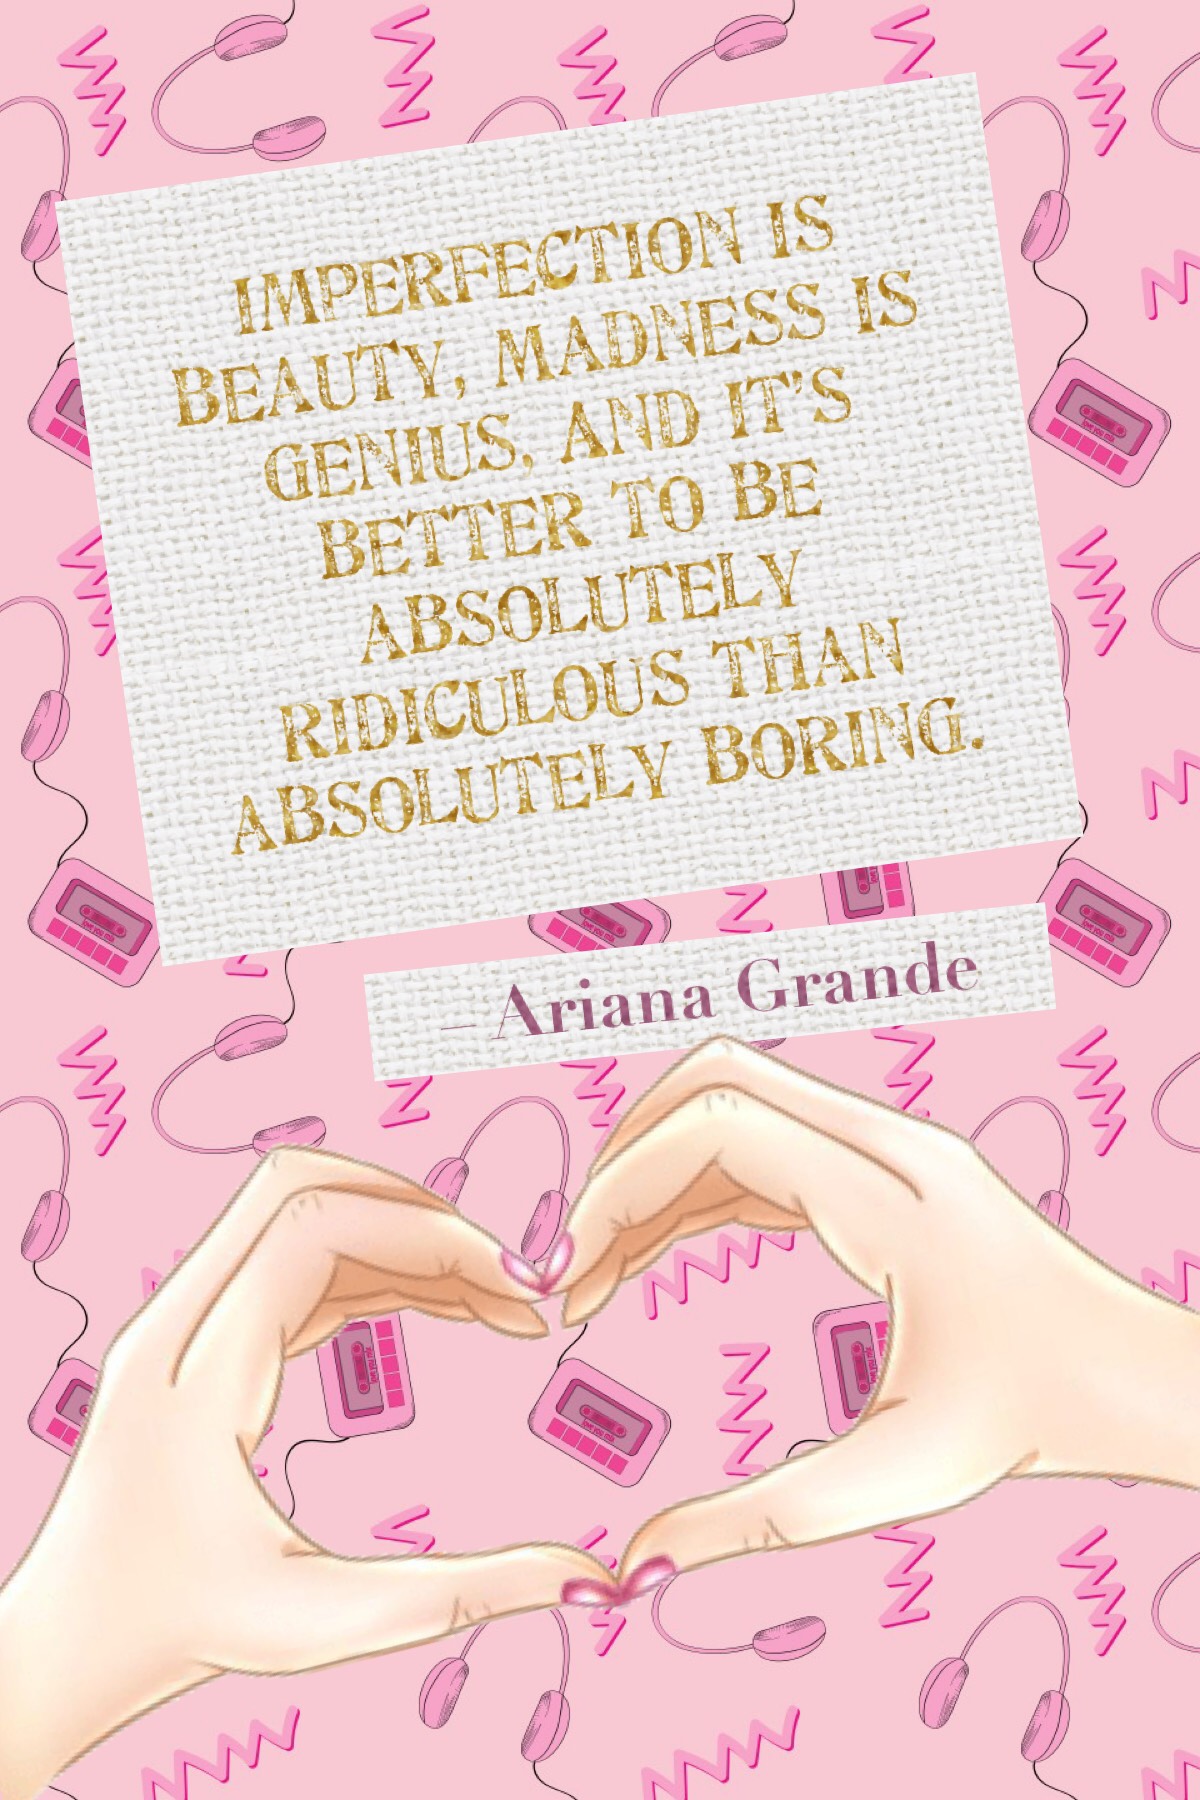 Quote by Ariana 